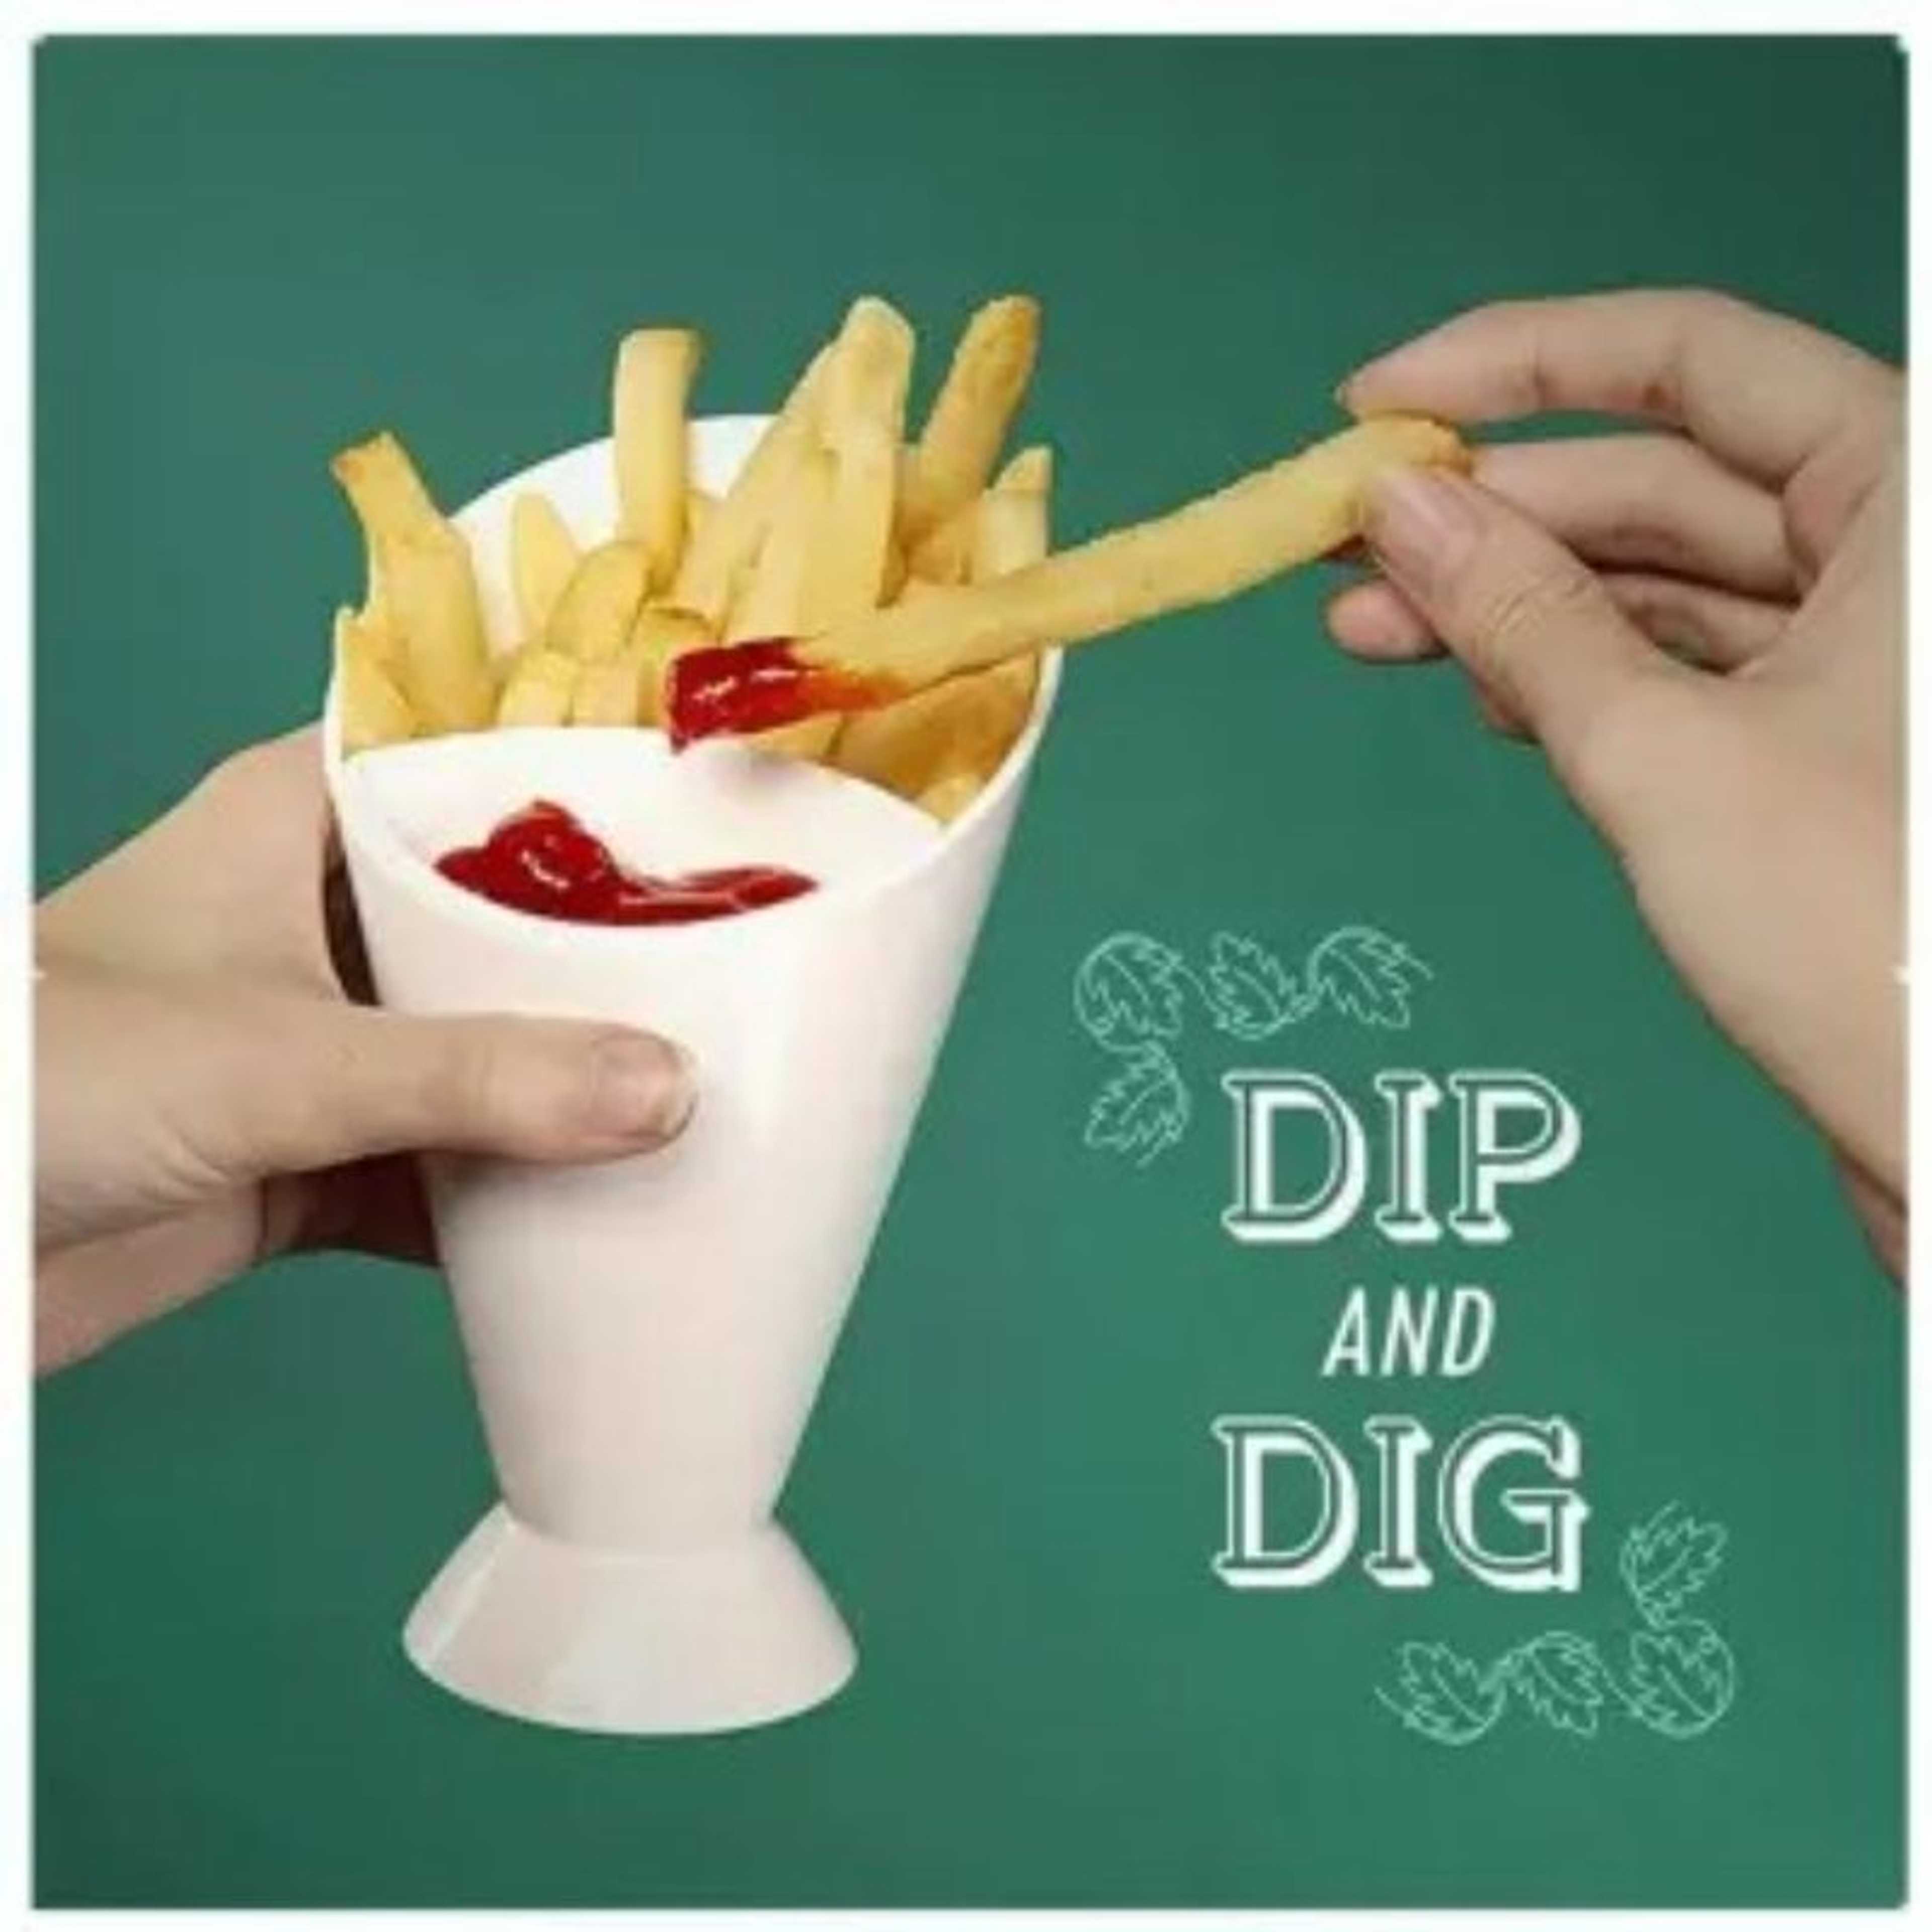 Dipper Fry Snack Cone Stand French Fries Sauce Ketchup Dip Holder Container Cup